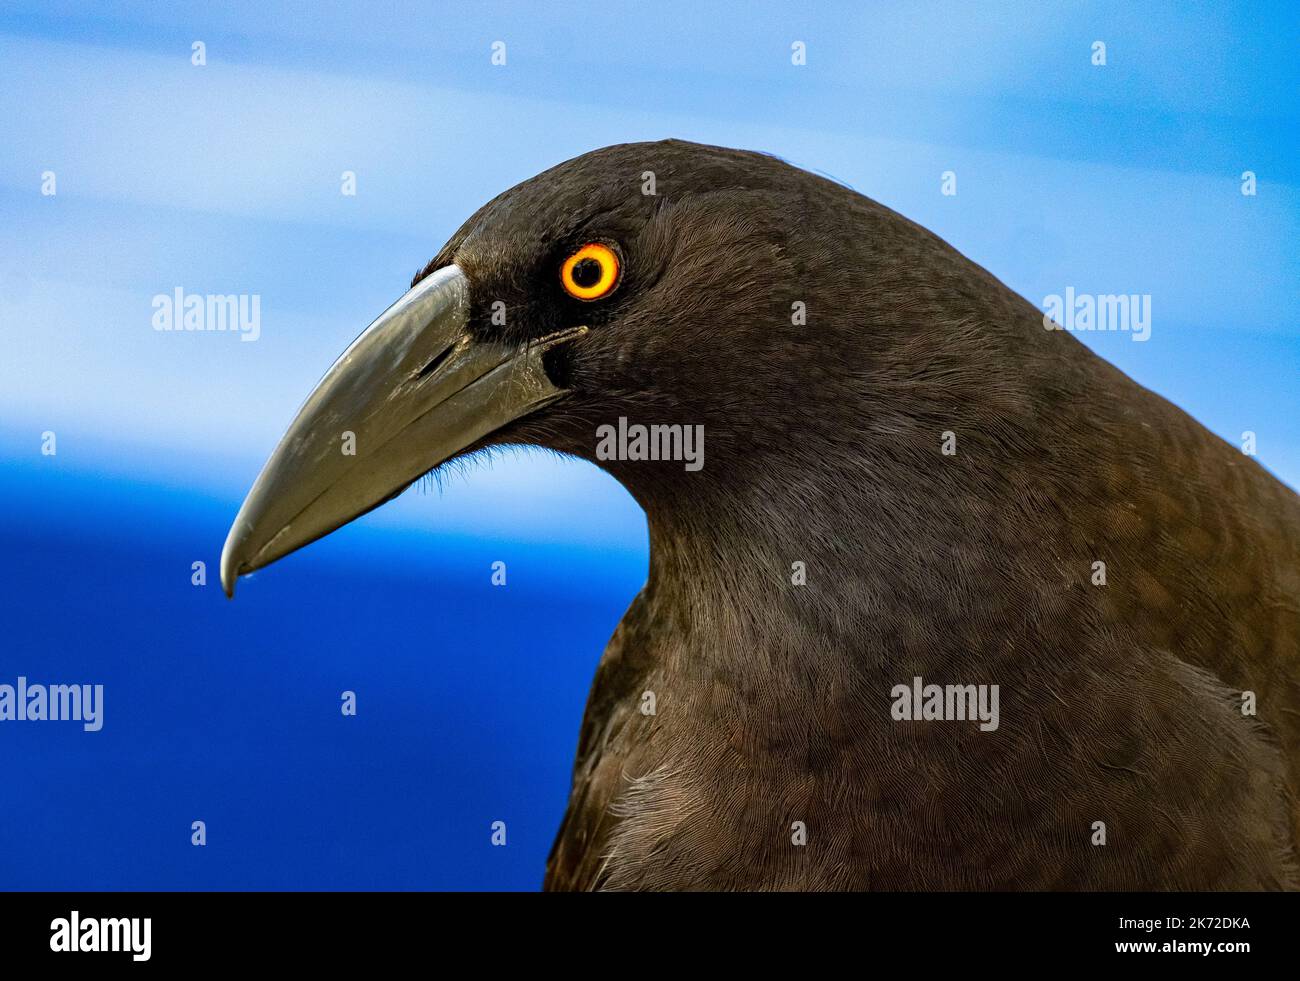 The sharp, beady, golden eye and beak of the Australian native bird called the currawong. Species name: Strepera Stock Photo